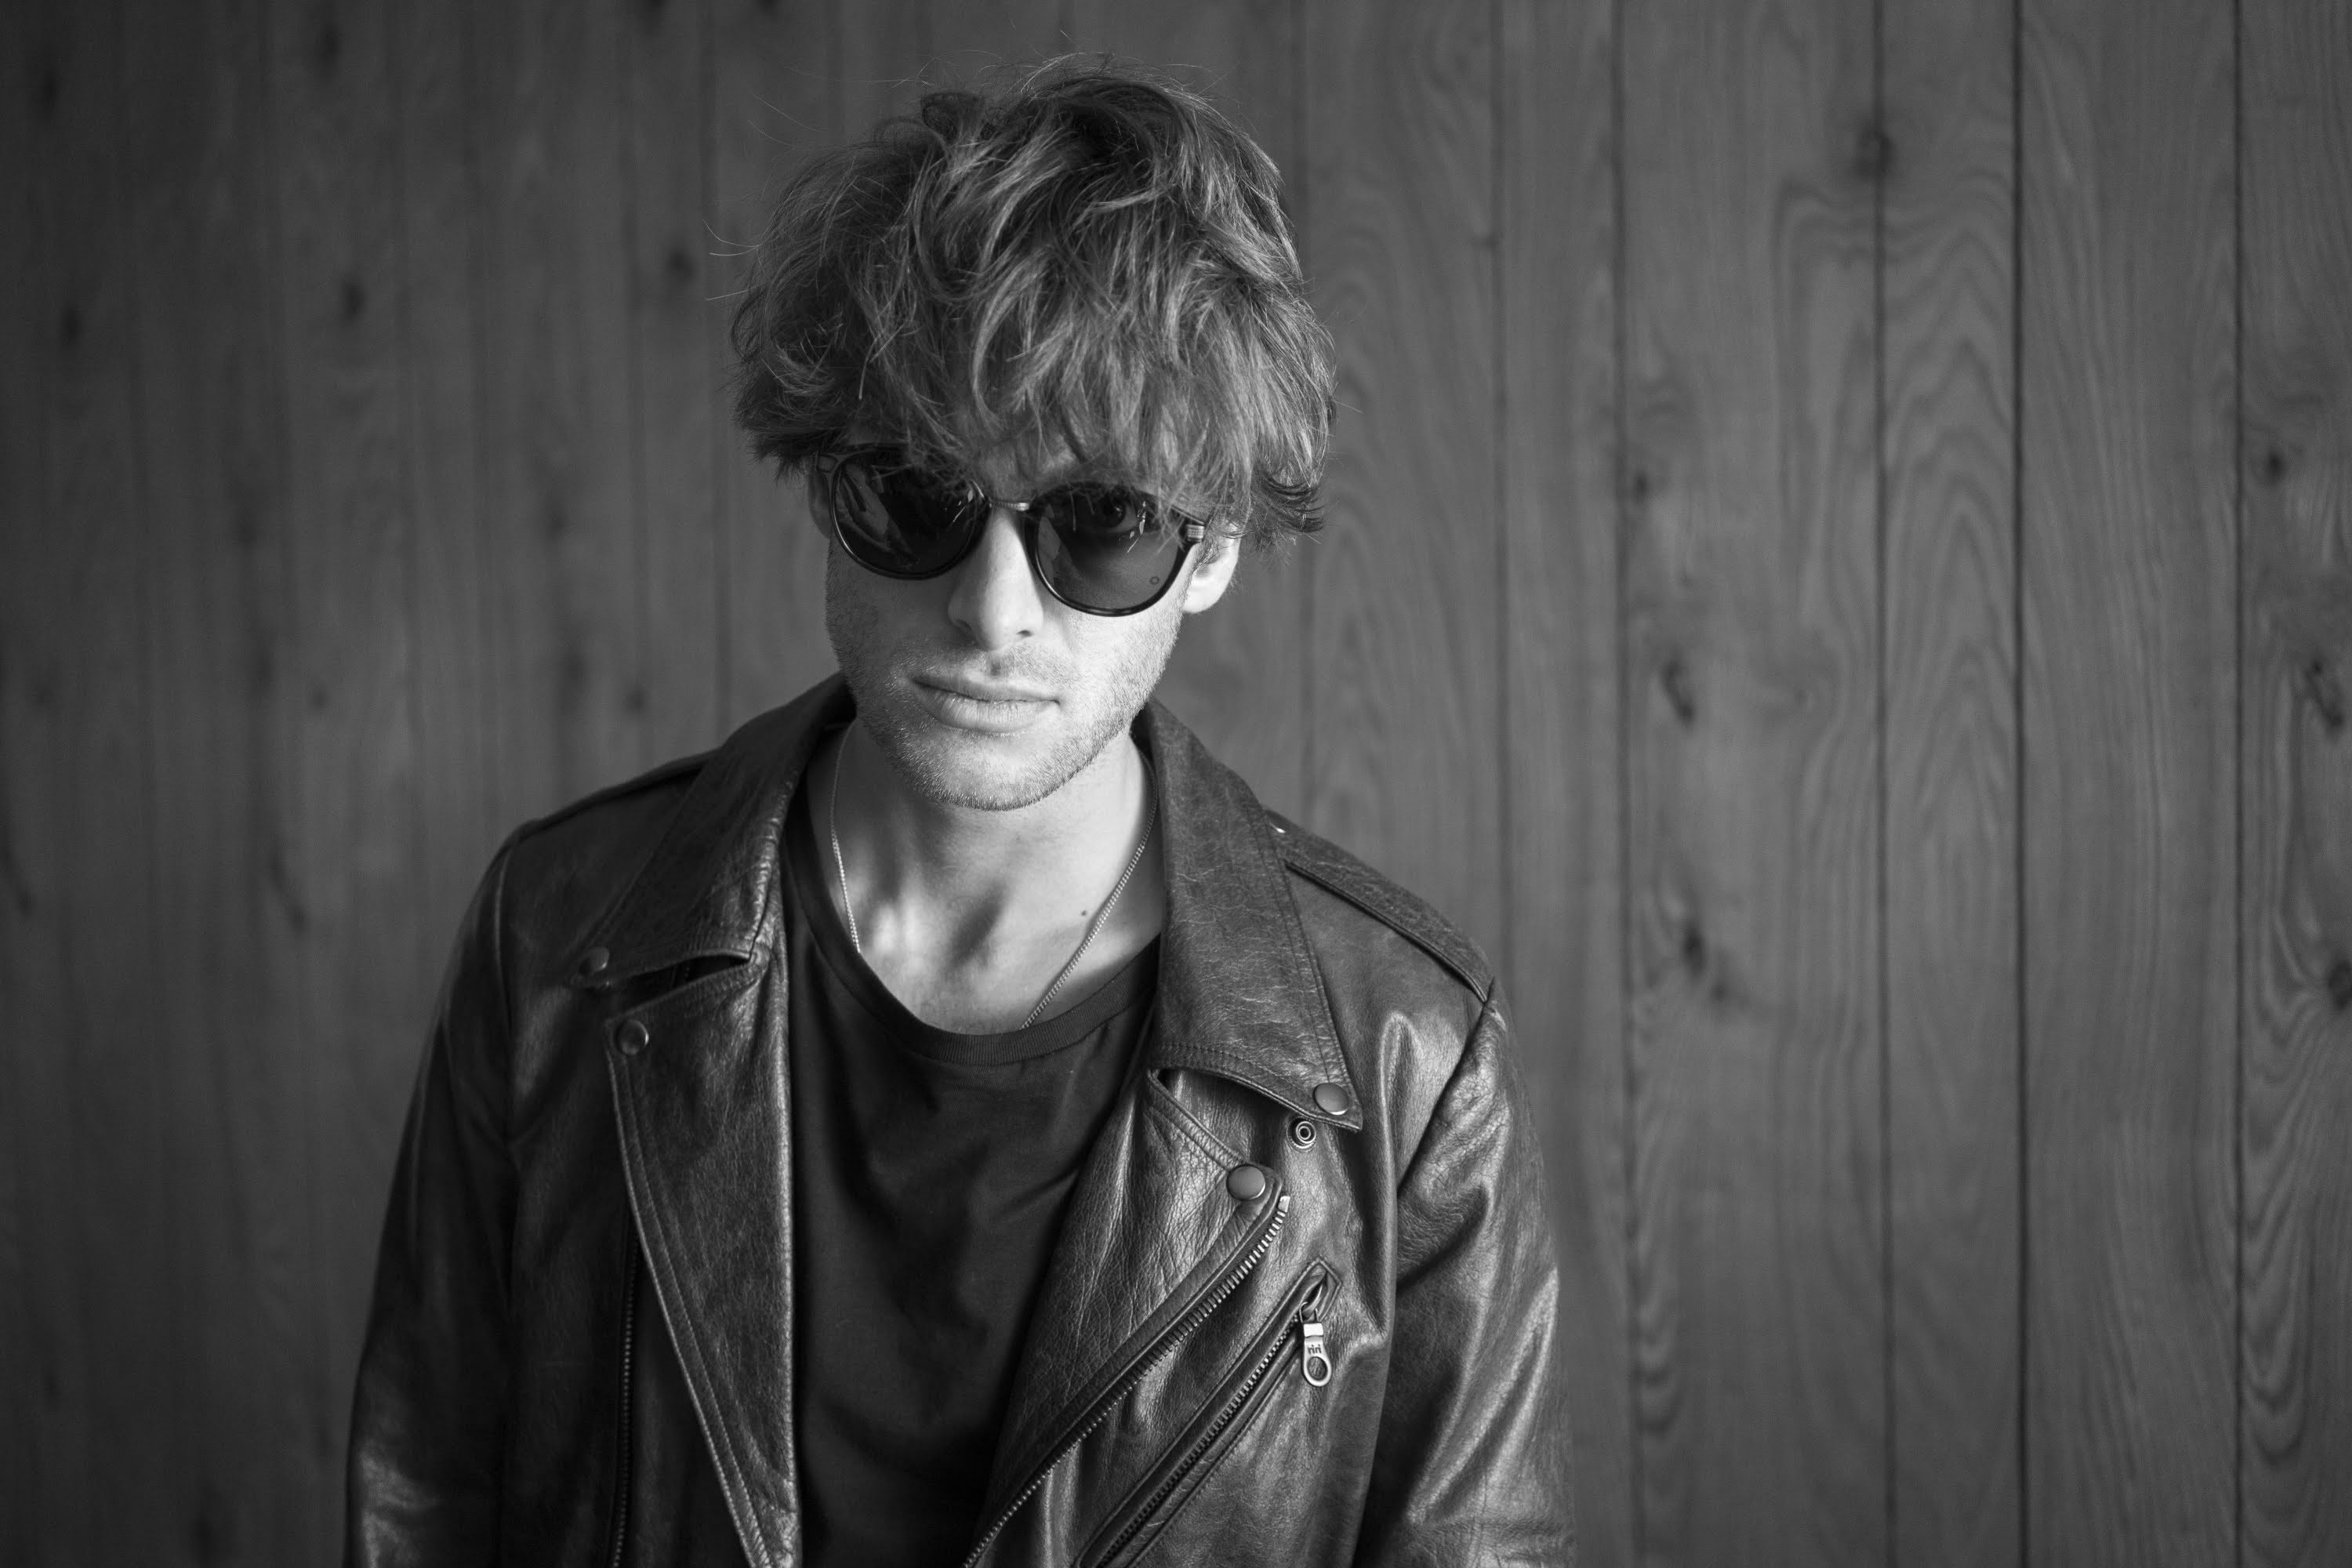 Paolo Nutini wallpapers, Music, HQ Paolo Nutini pictures | 4K Wallpapers 2019 3000x2000